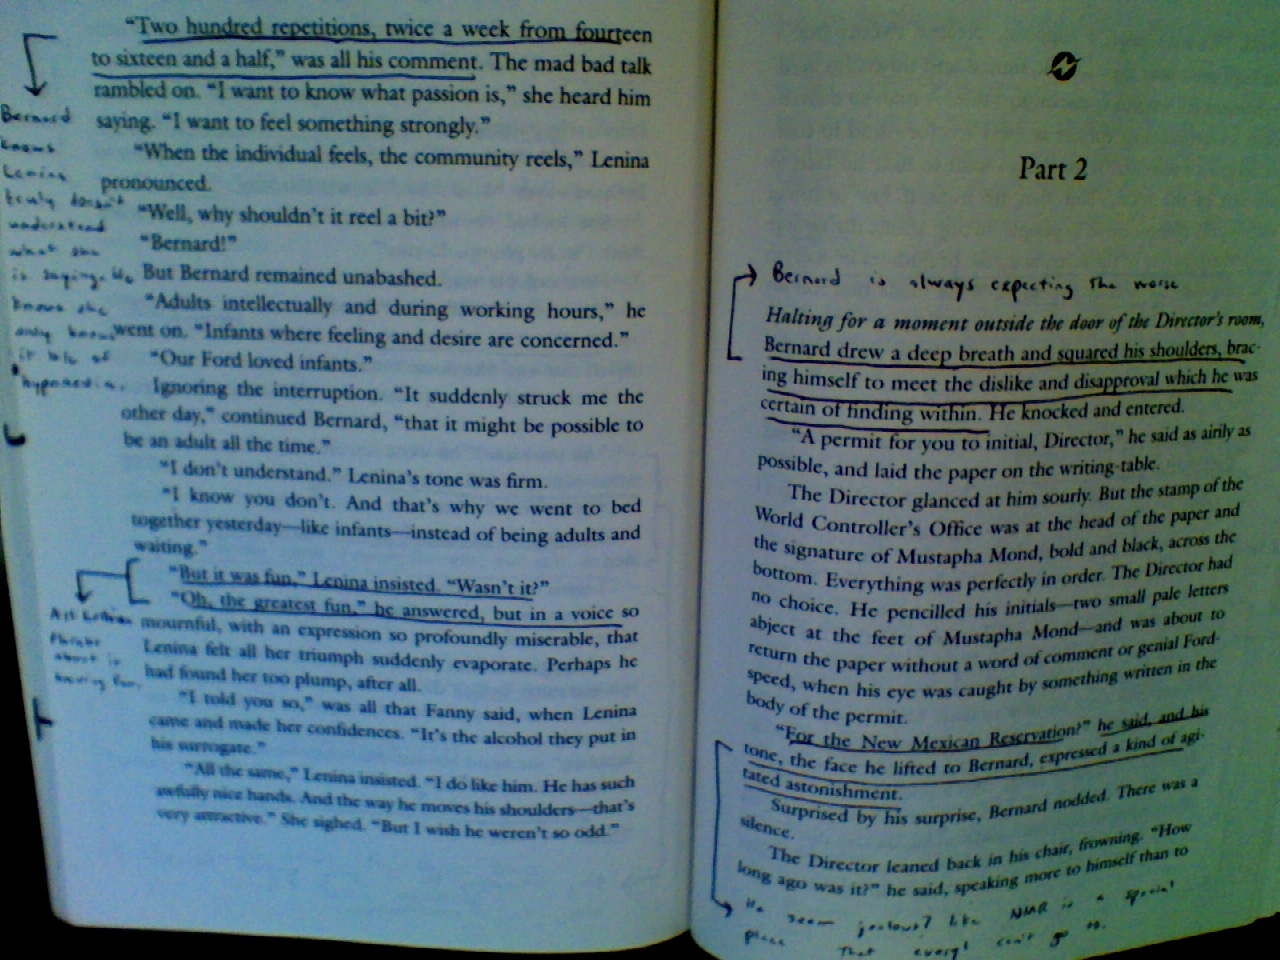 Example of annotating